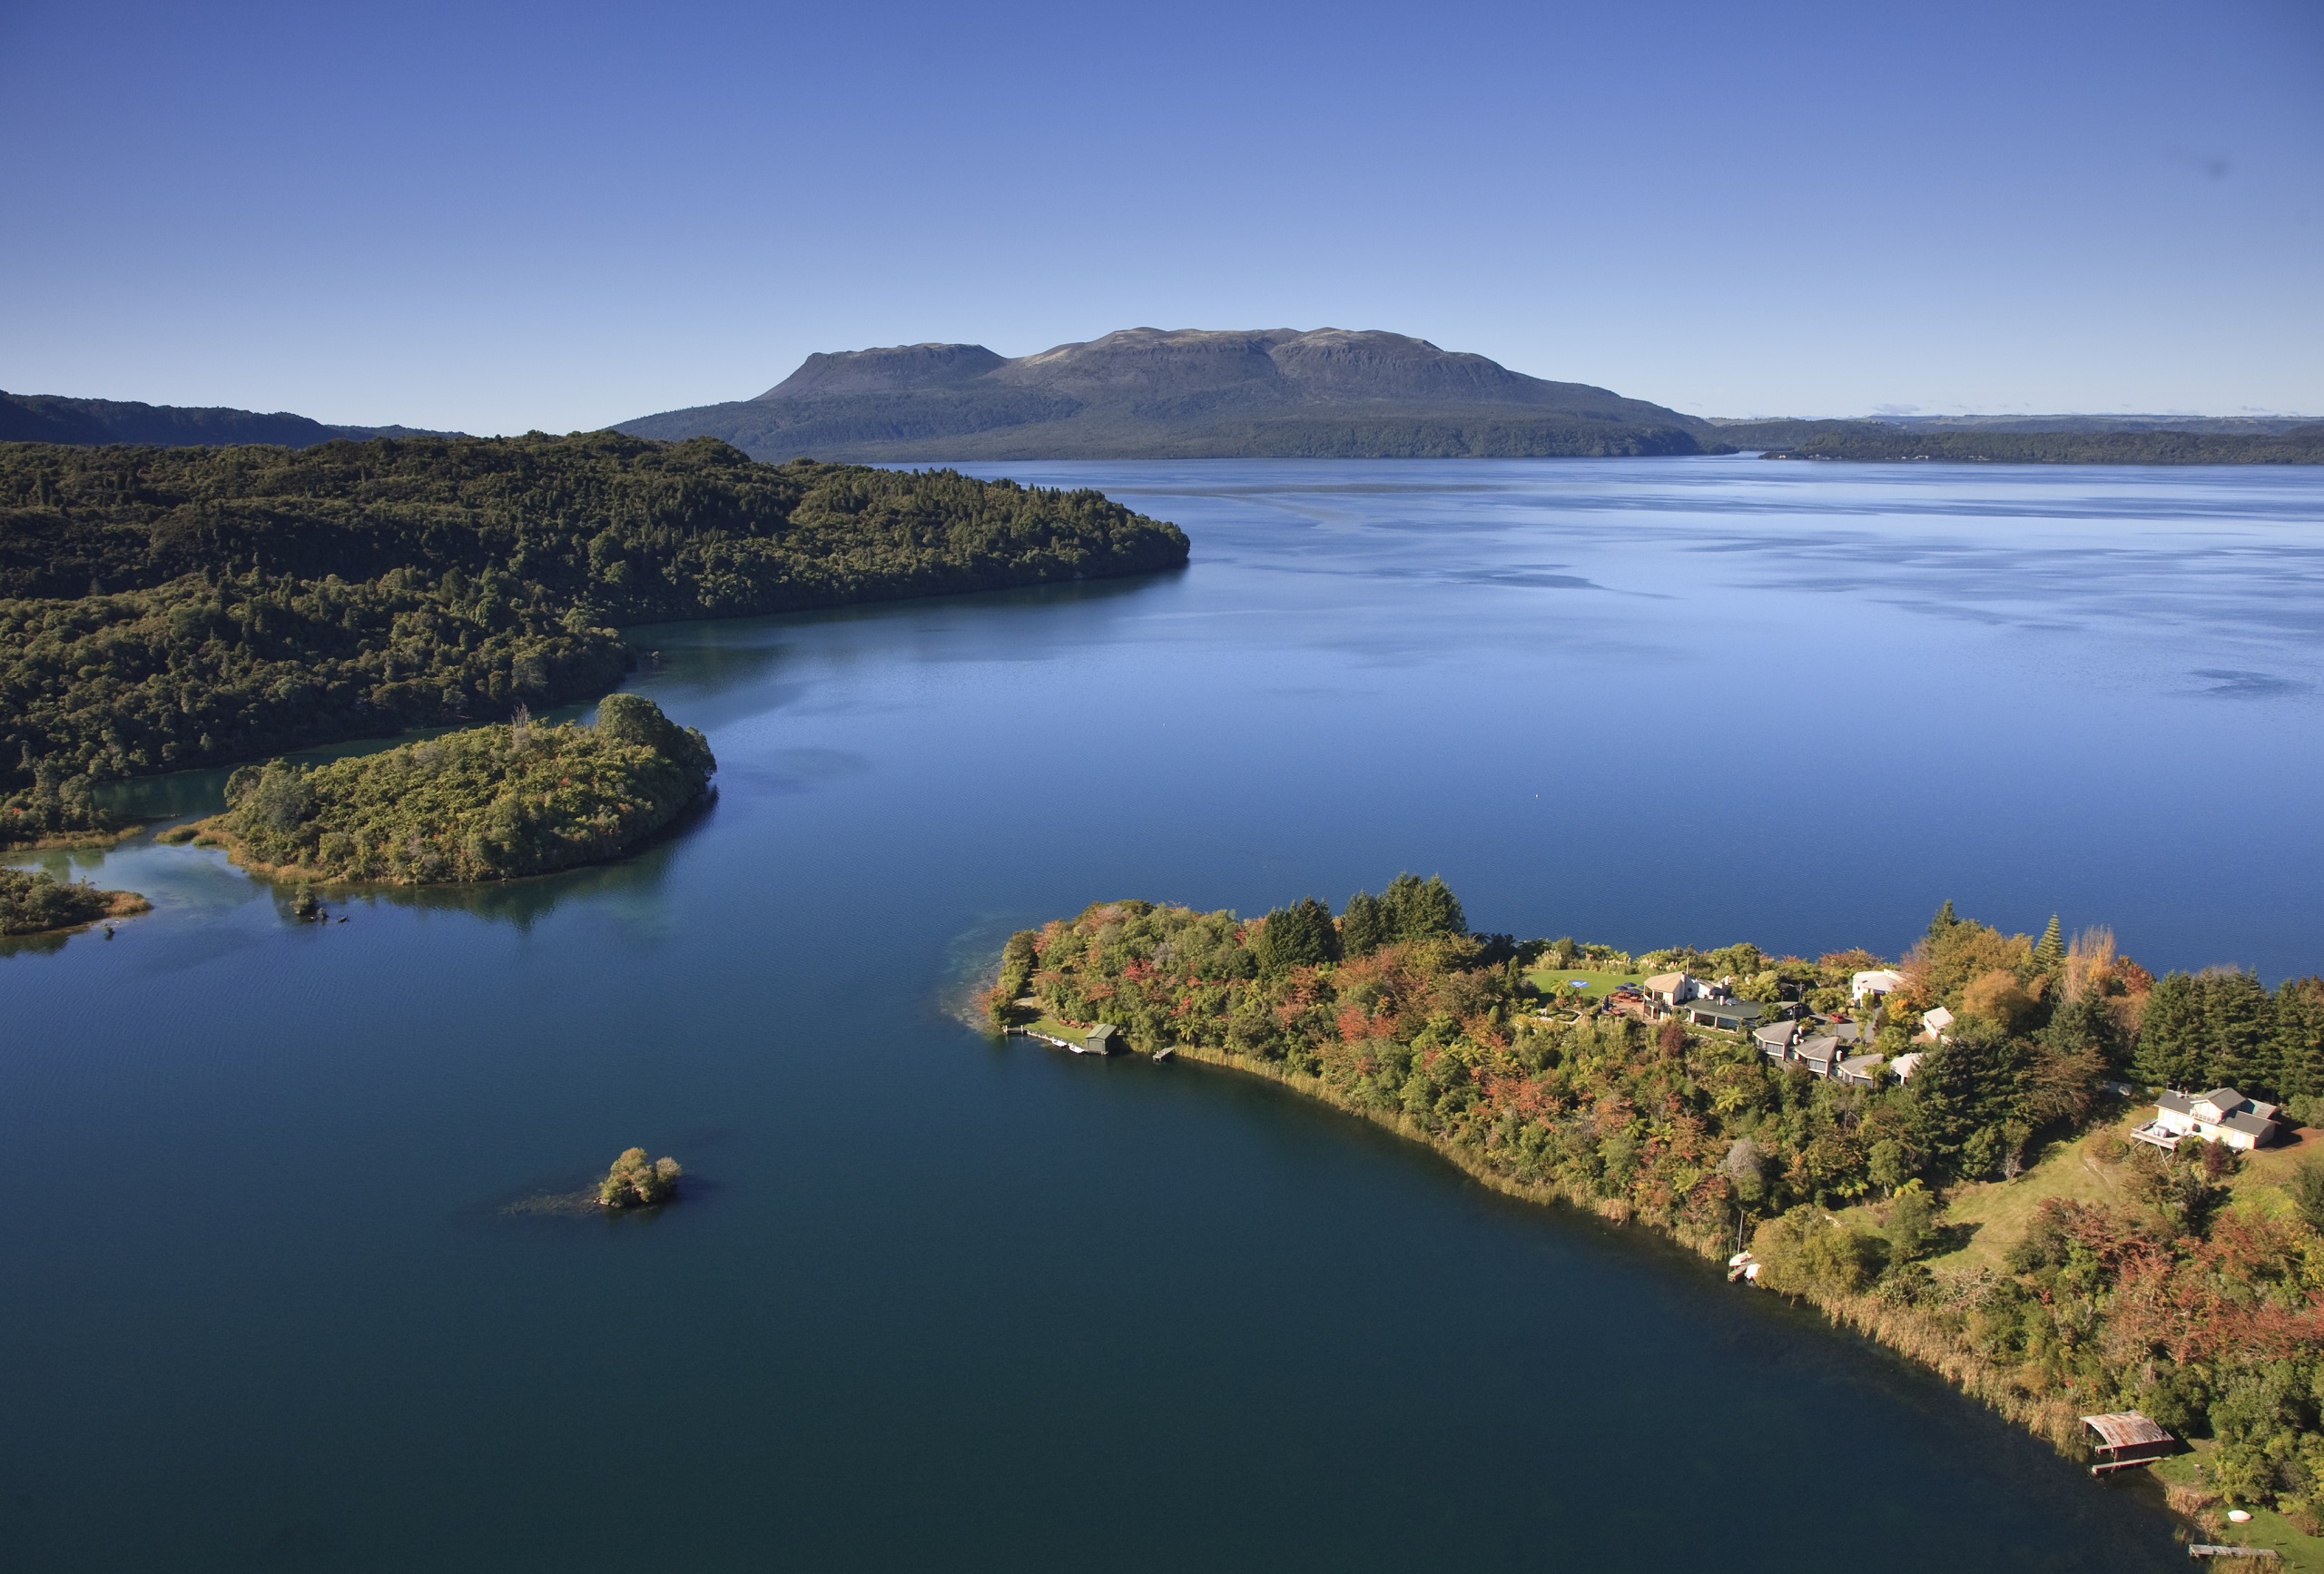 View of Solitaire Lodge overlooking Lake Tarawera and Mount Tarawera in the distance